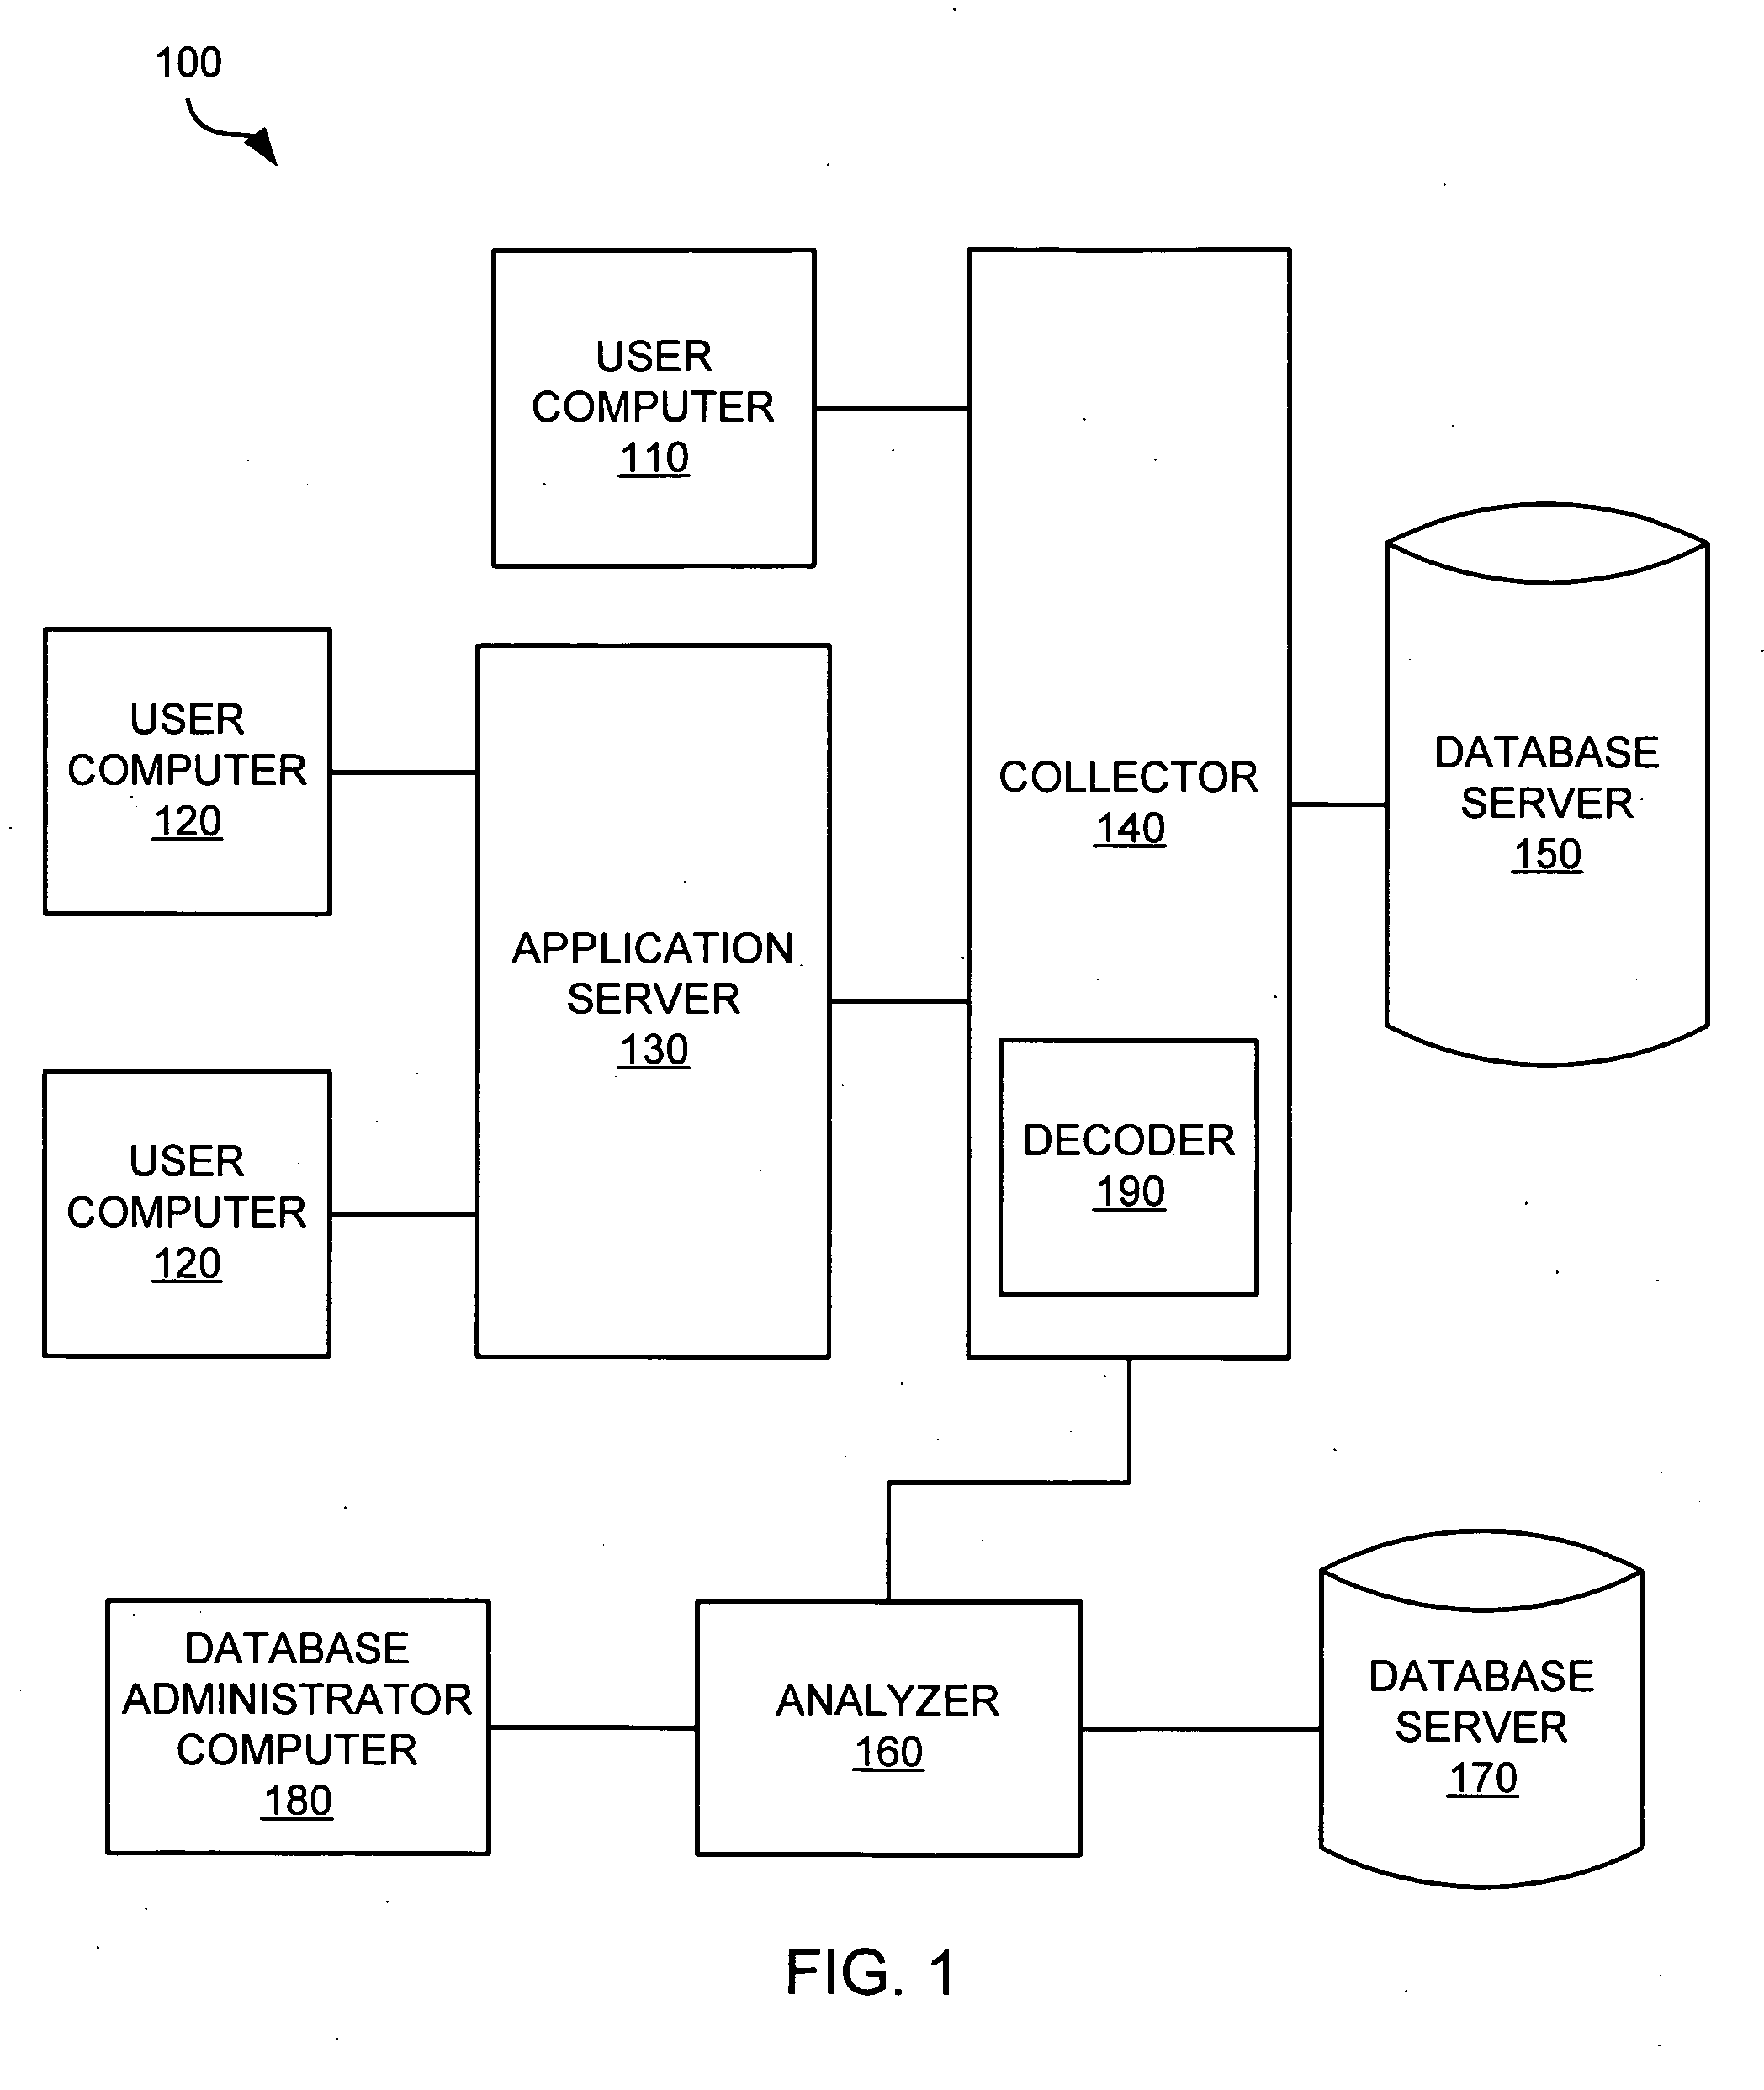 Generation of names related to organization actions